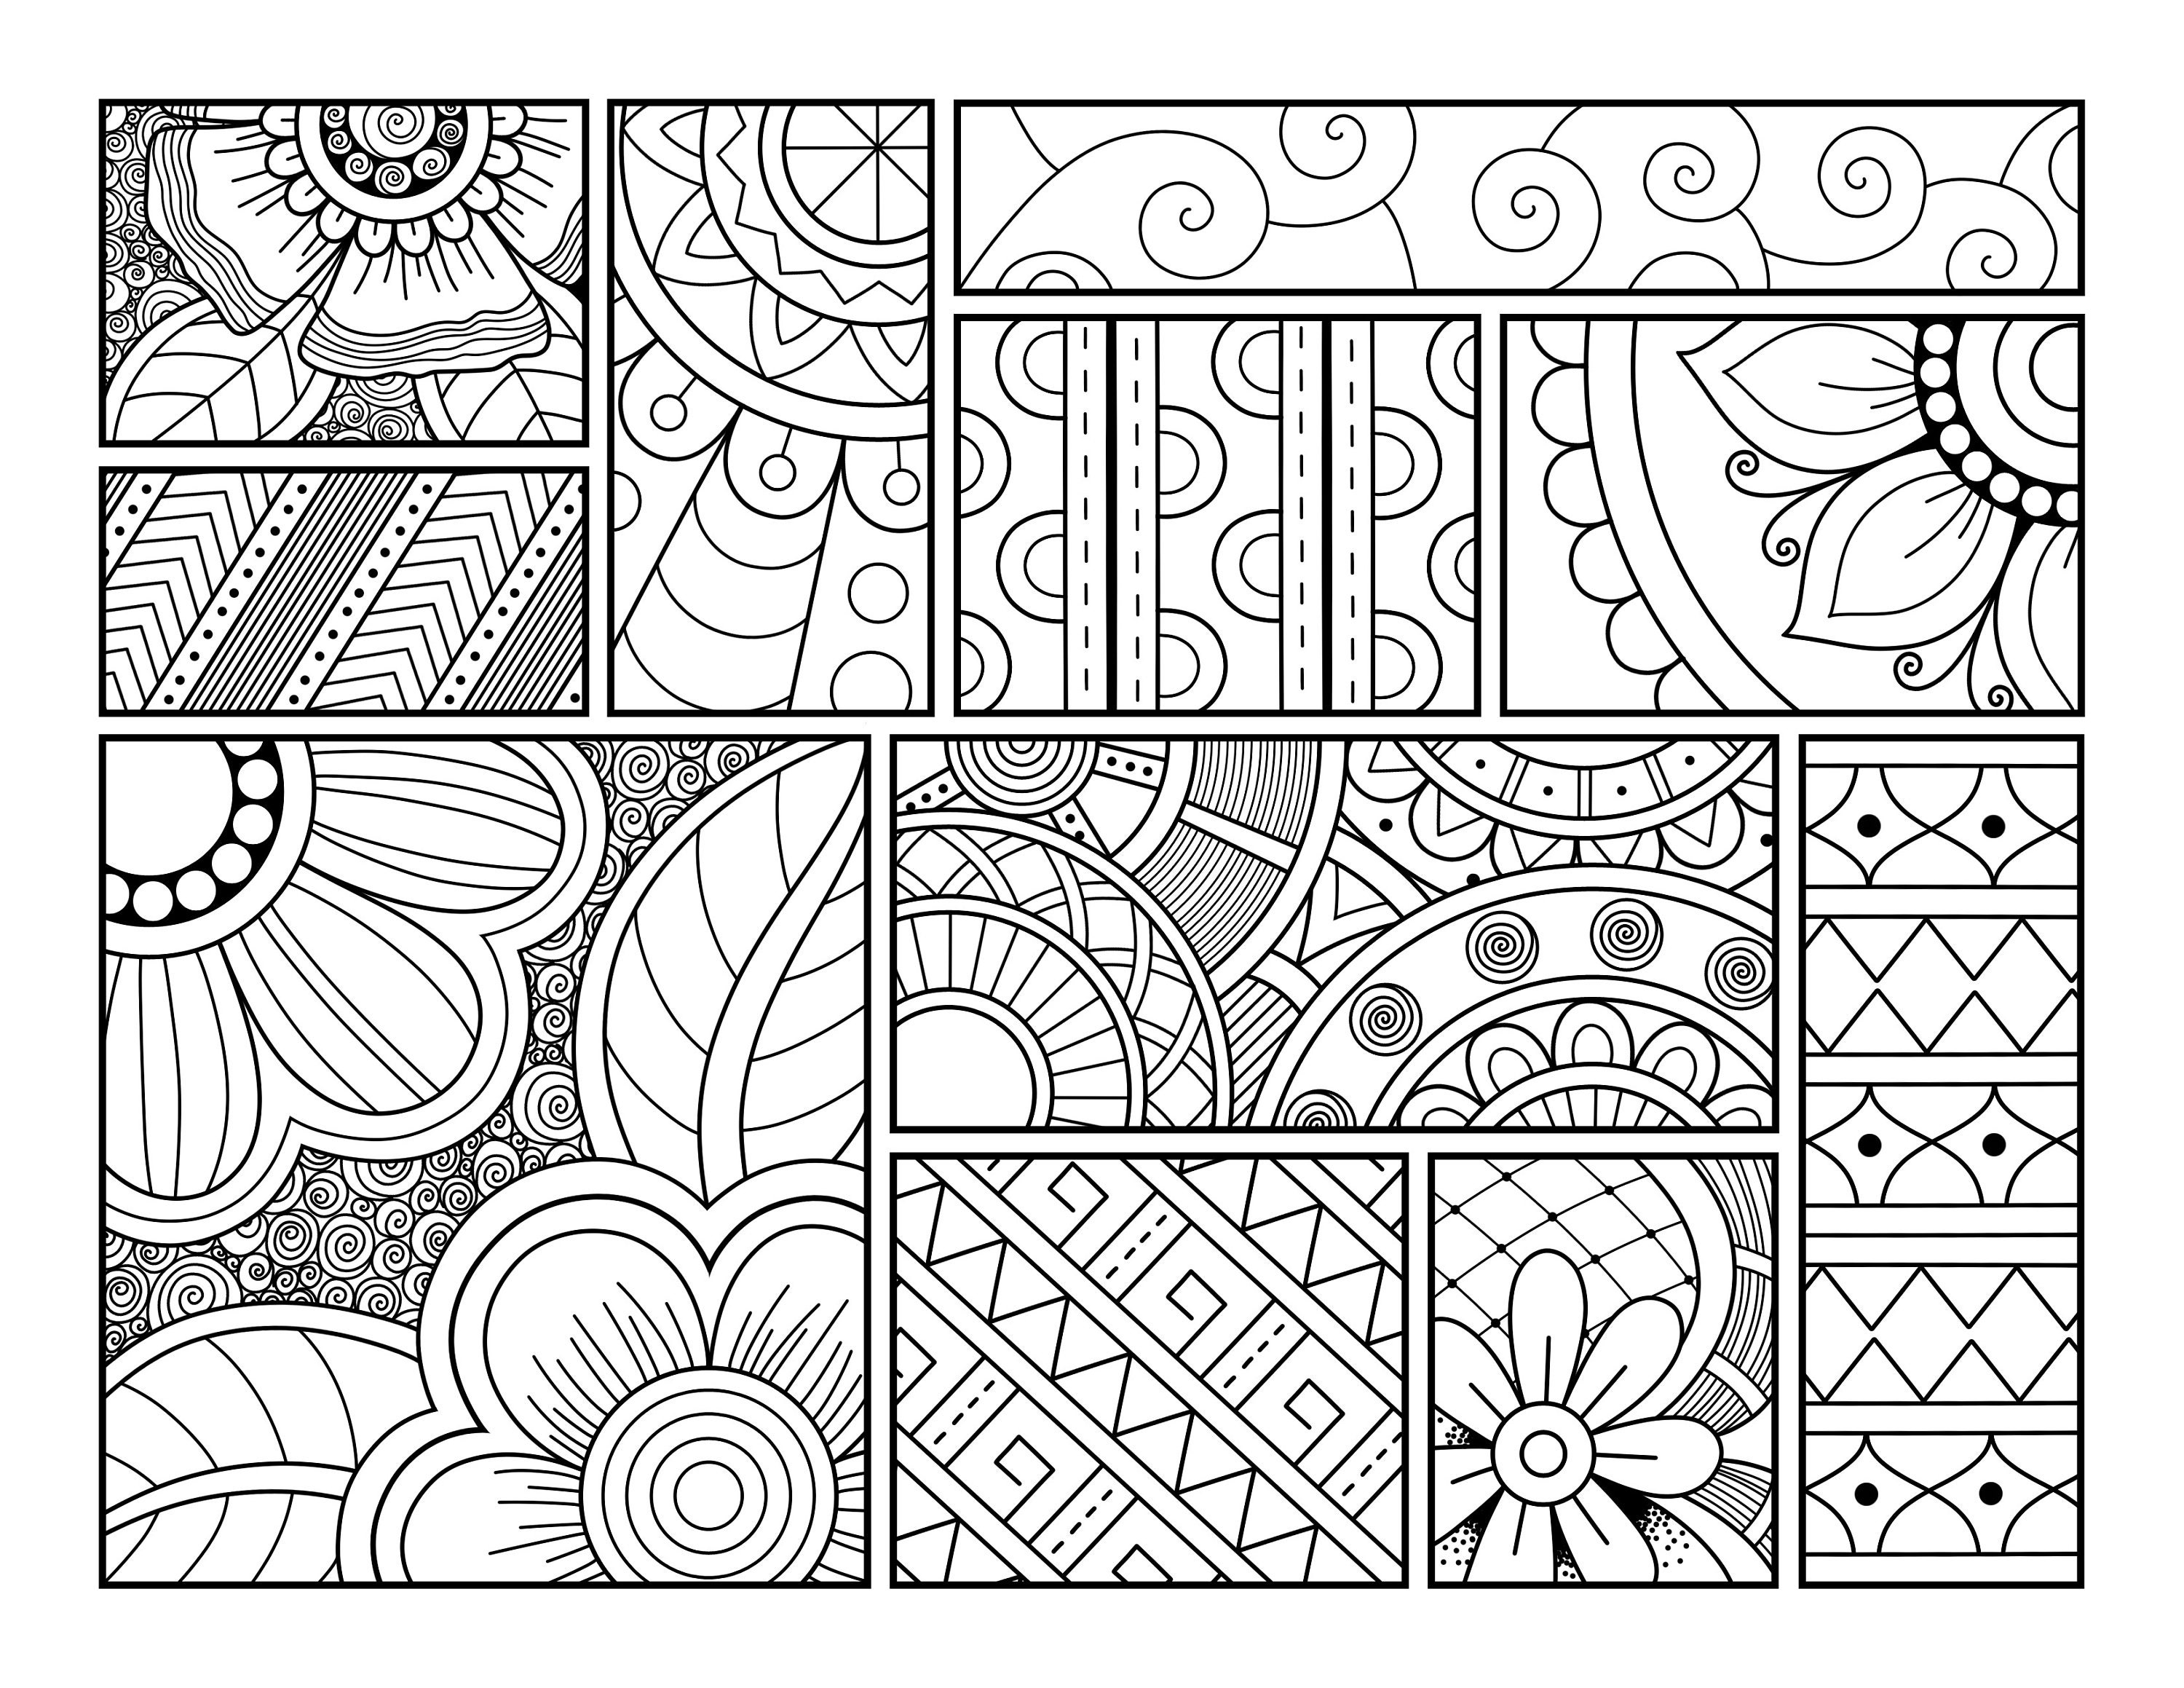 20 COLORING PAGES Adult Coloring Book Volume 2 Fun Modern | Etsy